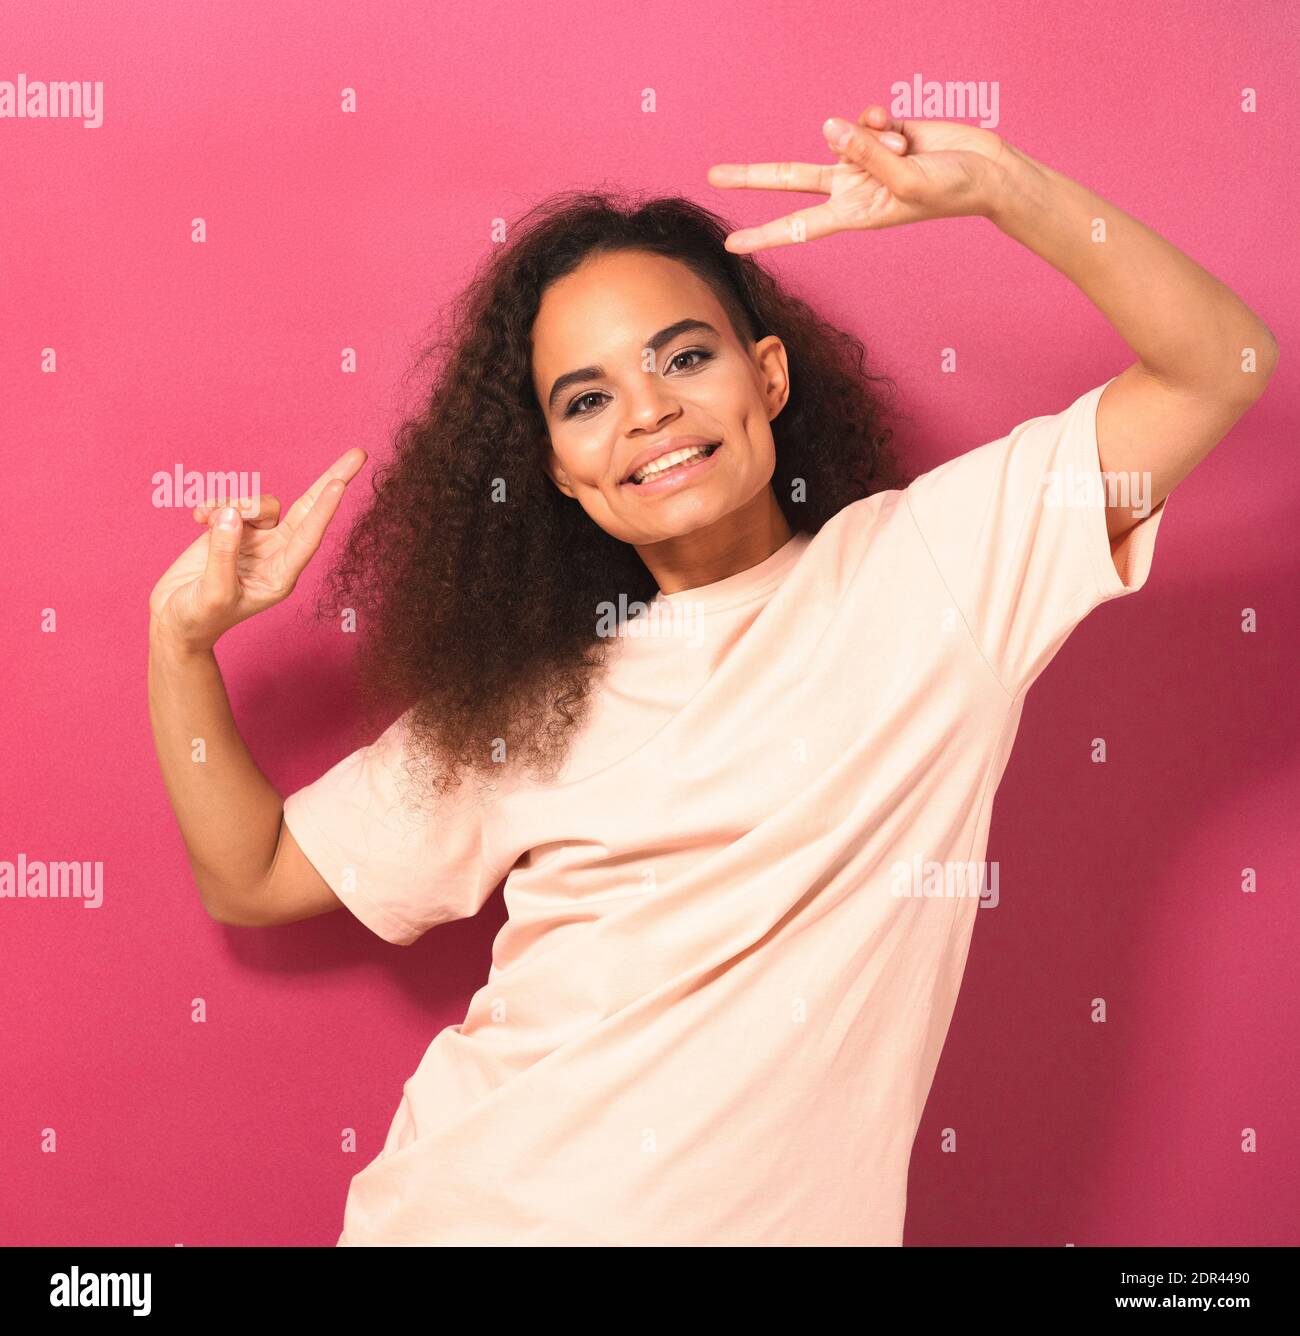 Young African American girl with Afro hair dancing gesturing peace with hands lifted up looking positively at camera wearing peachy t-shirt isolated Stock Photo